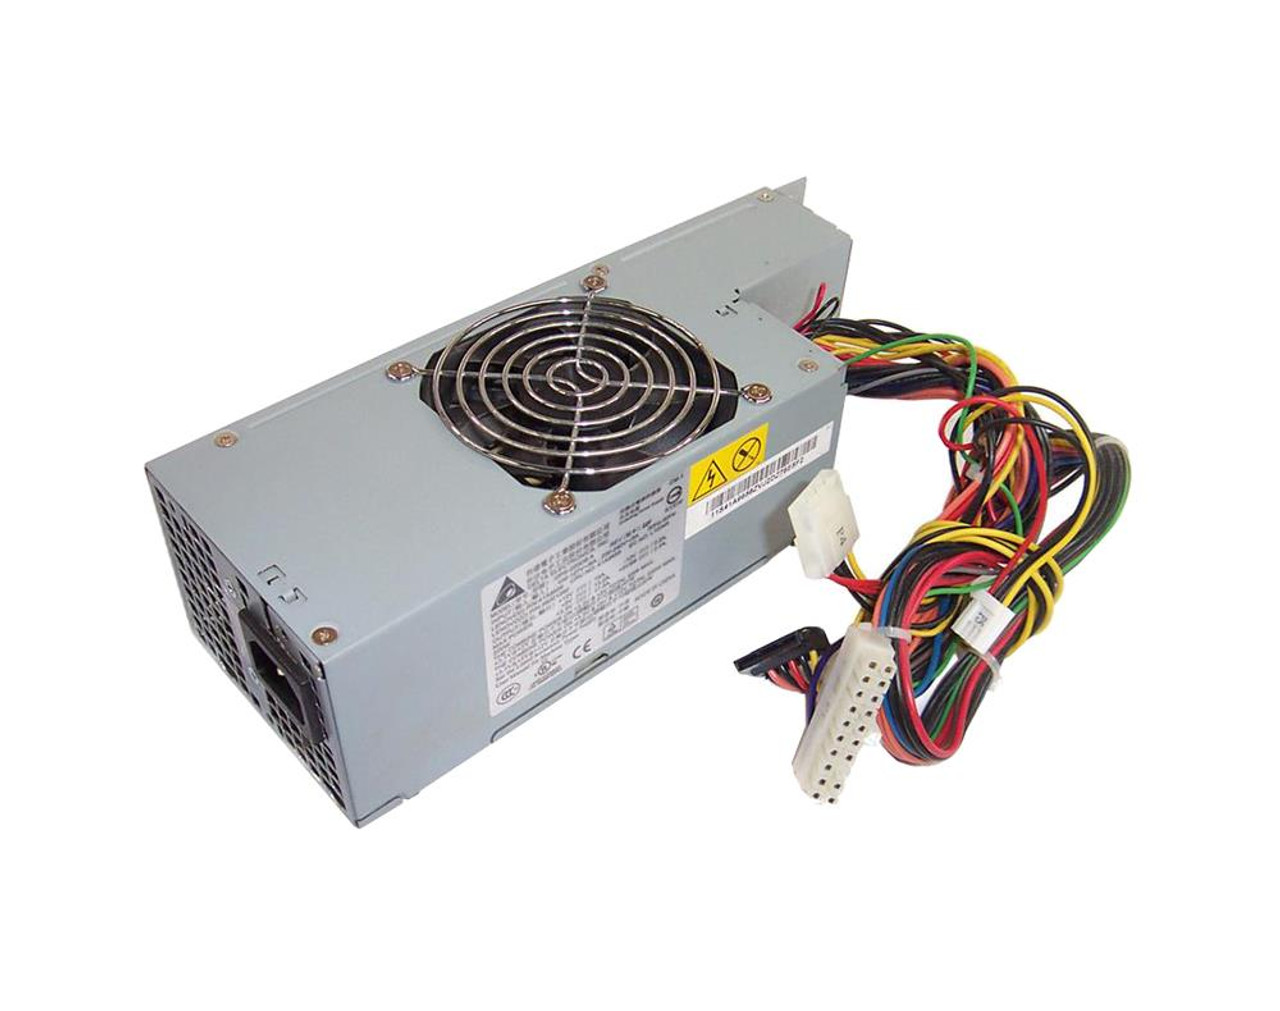 PC6017 Lenovo 220-Watts Power Supply for ThinkCentre